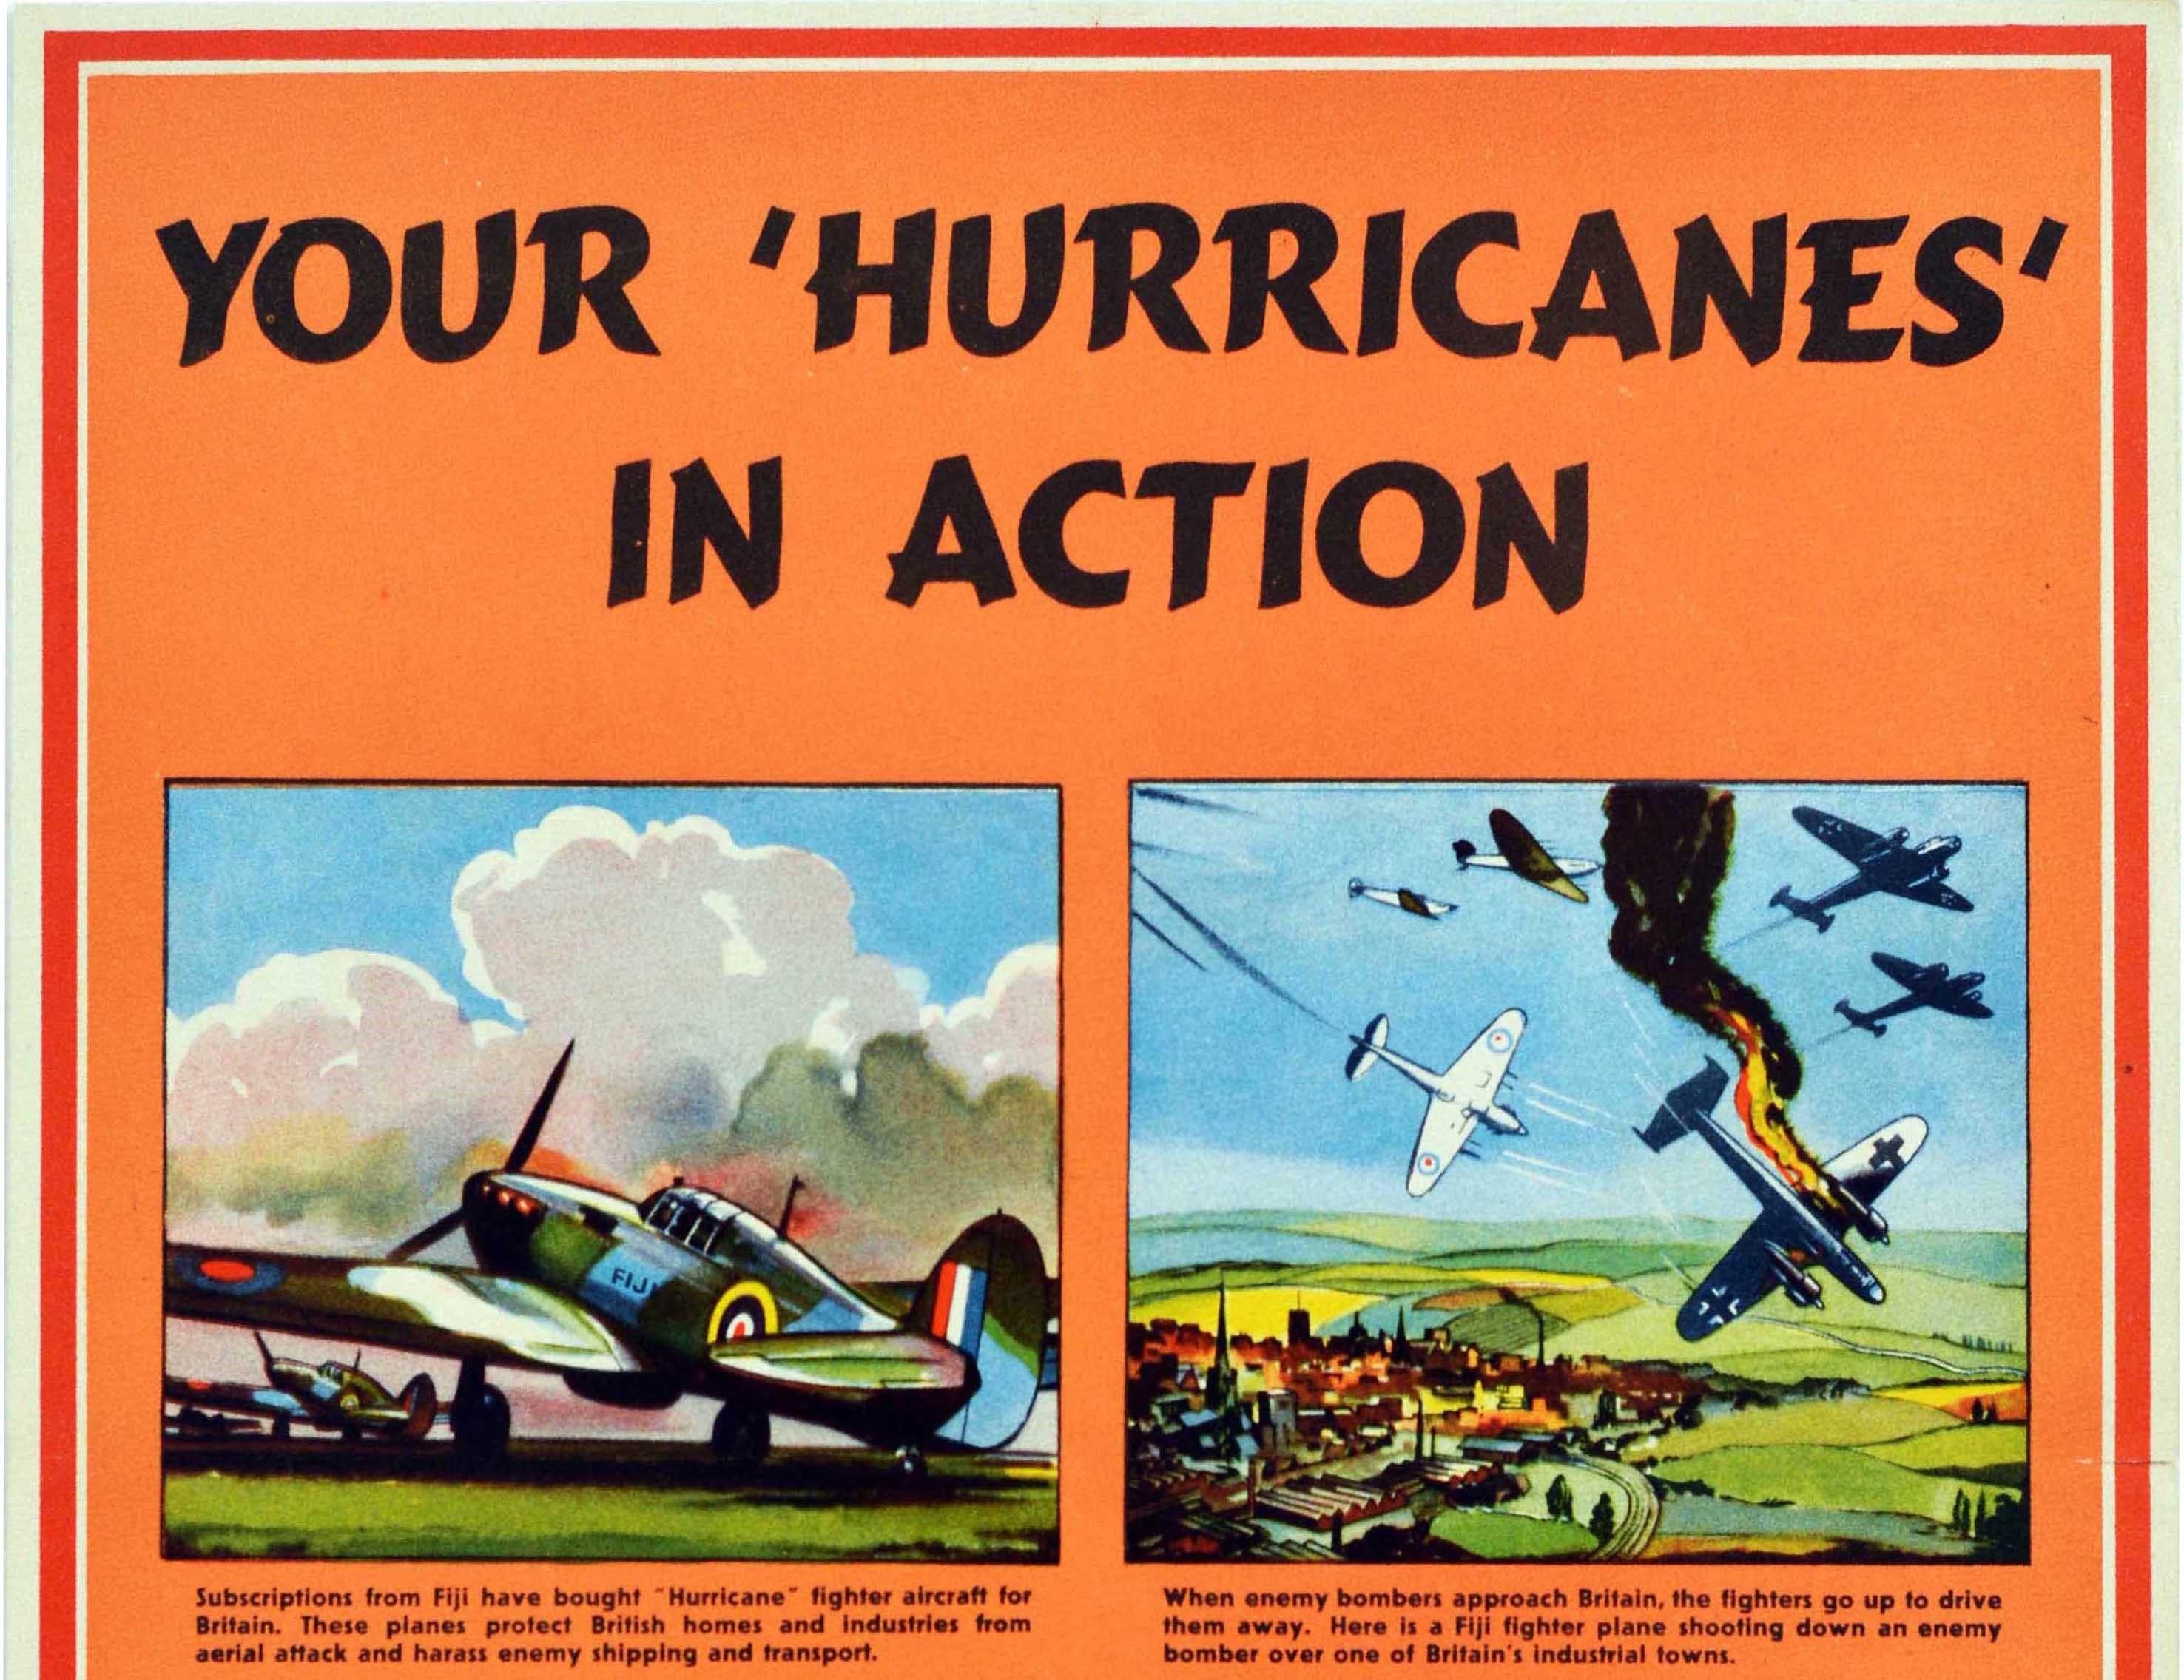 Original vintage World War Two poster - Your Hurricanes In Action Thank You Fiji! - featuring four colourful captioned illustrations depicting Hurricane fighter jets marked with Royal Air Force RAF roundels gifted by Fiji on the ground; showing the